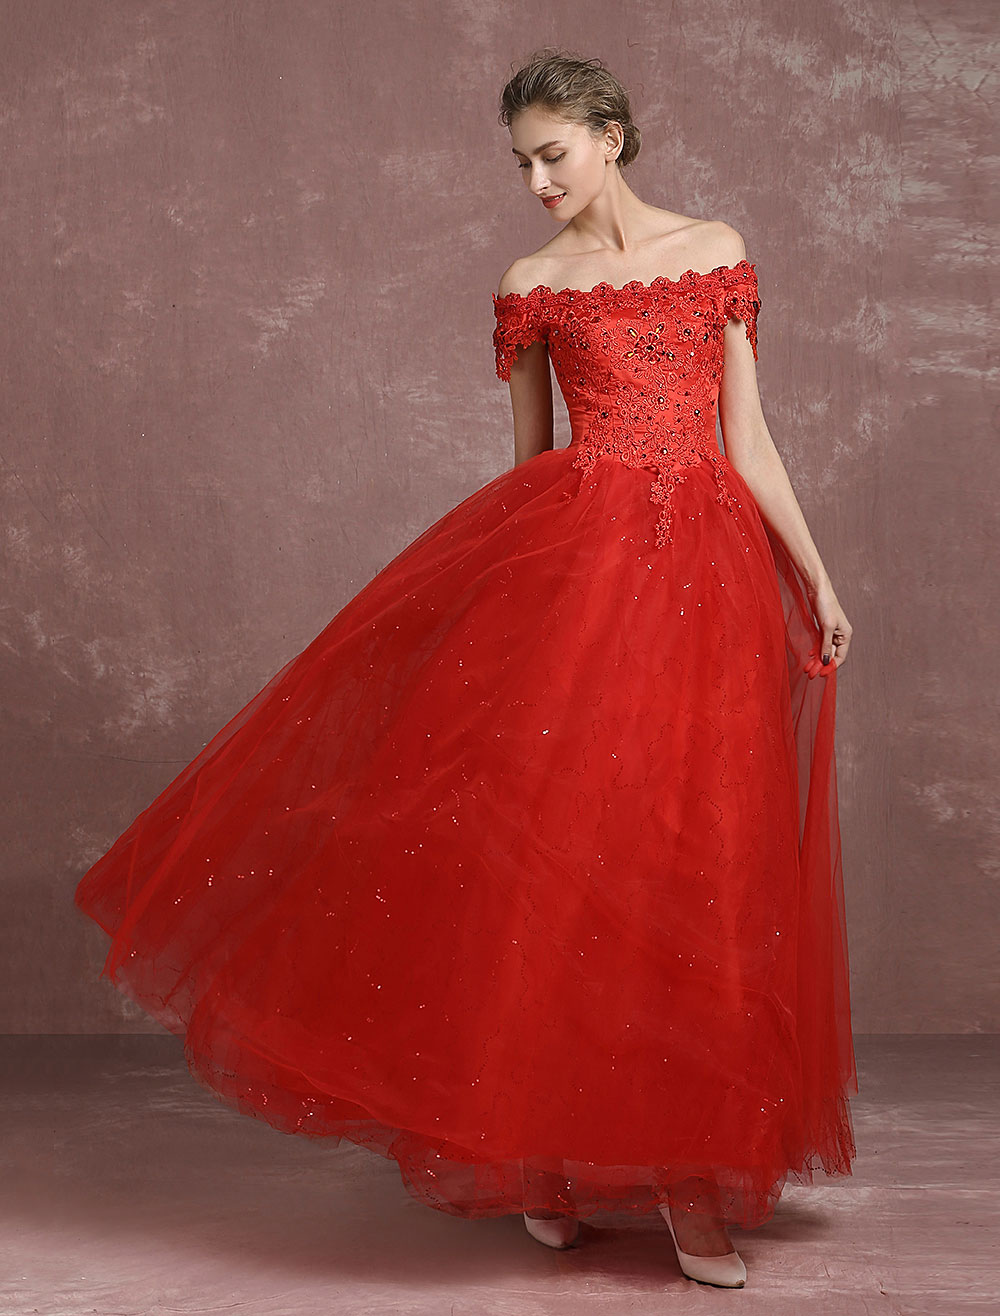 Red Wedding Dress Ball Gown Lace Beading Bridal Dress Off The Shoulder Sequins Floor Length Maxi Princess Summer Wedding Dresses 2018 photo